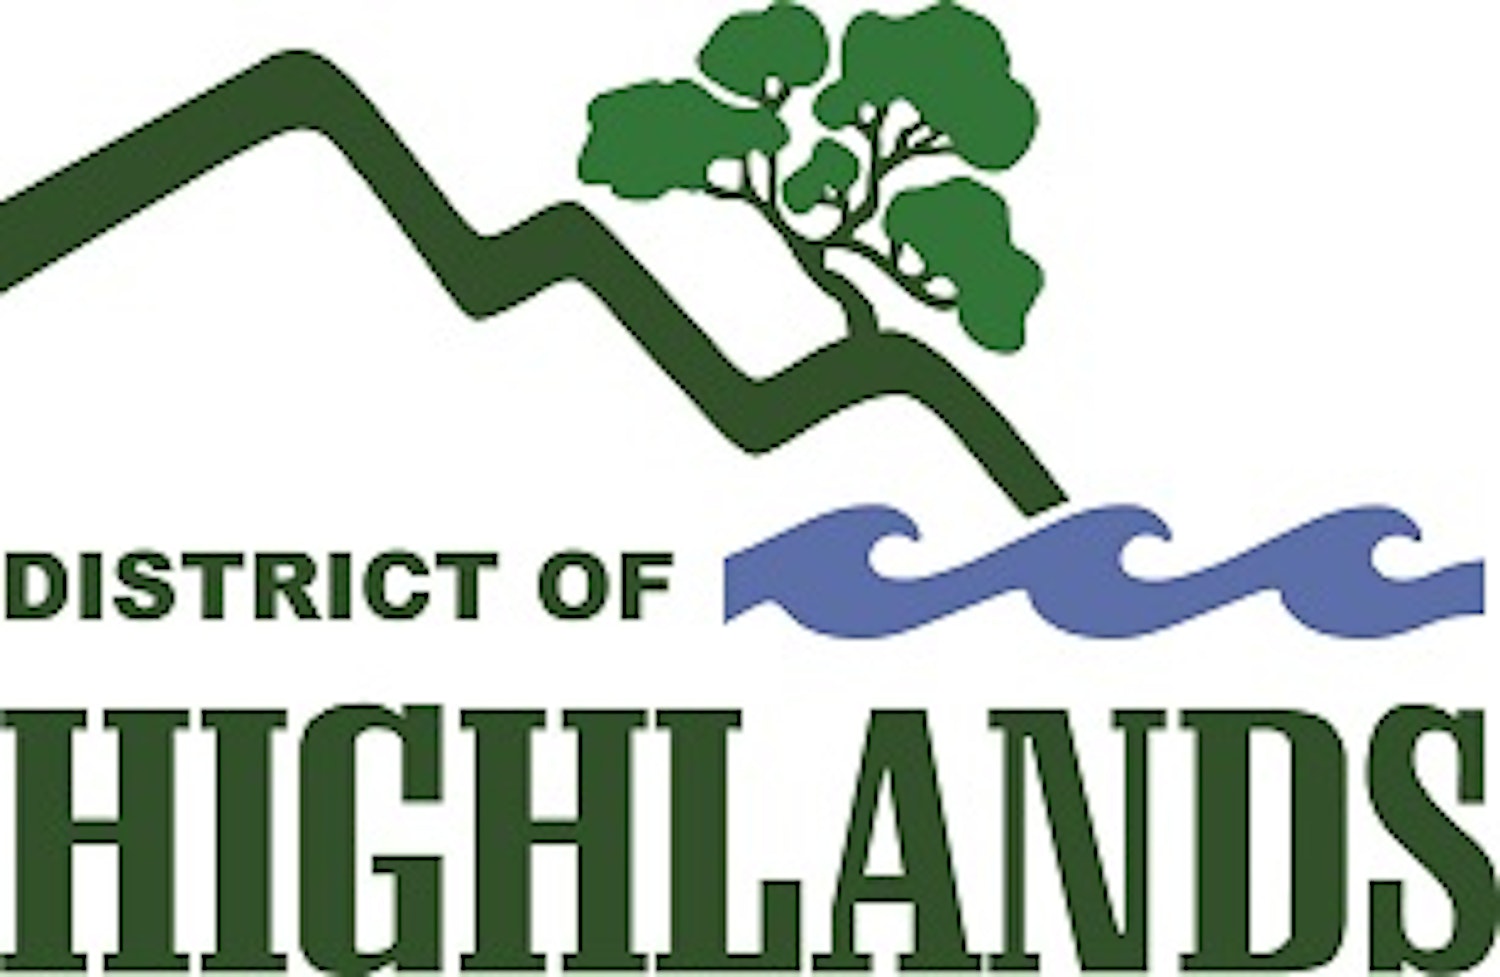 South Highlands Local Area Plan (SHLAP)